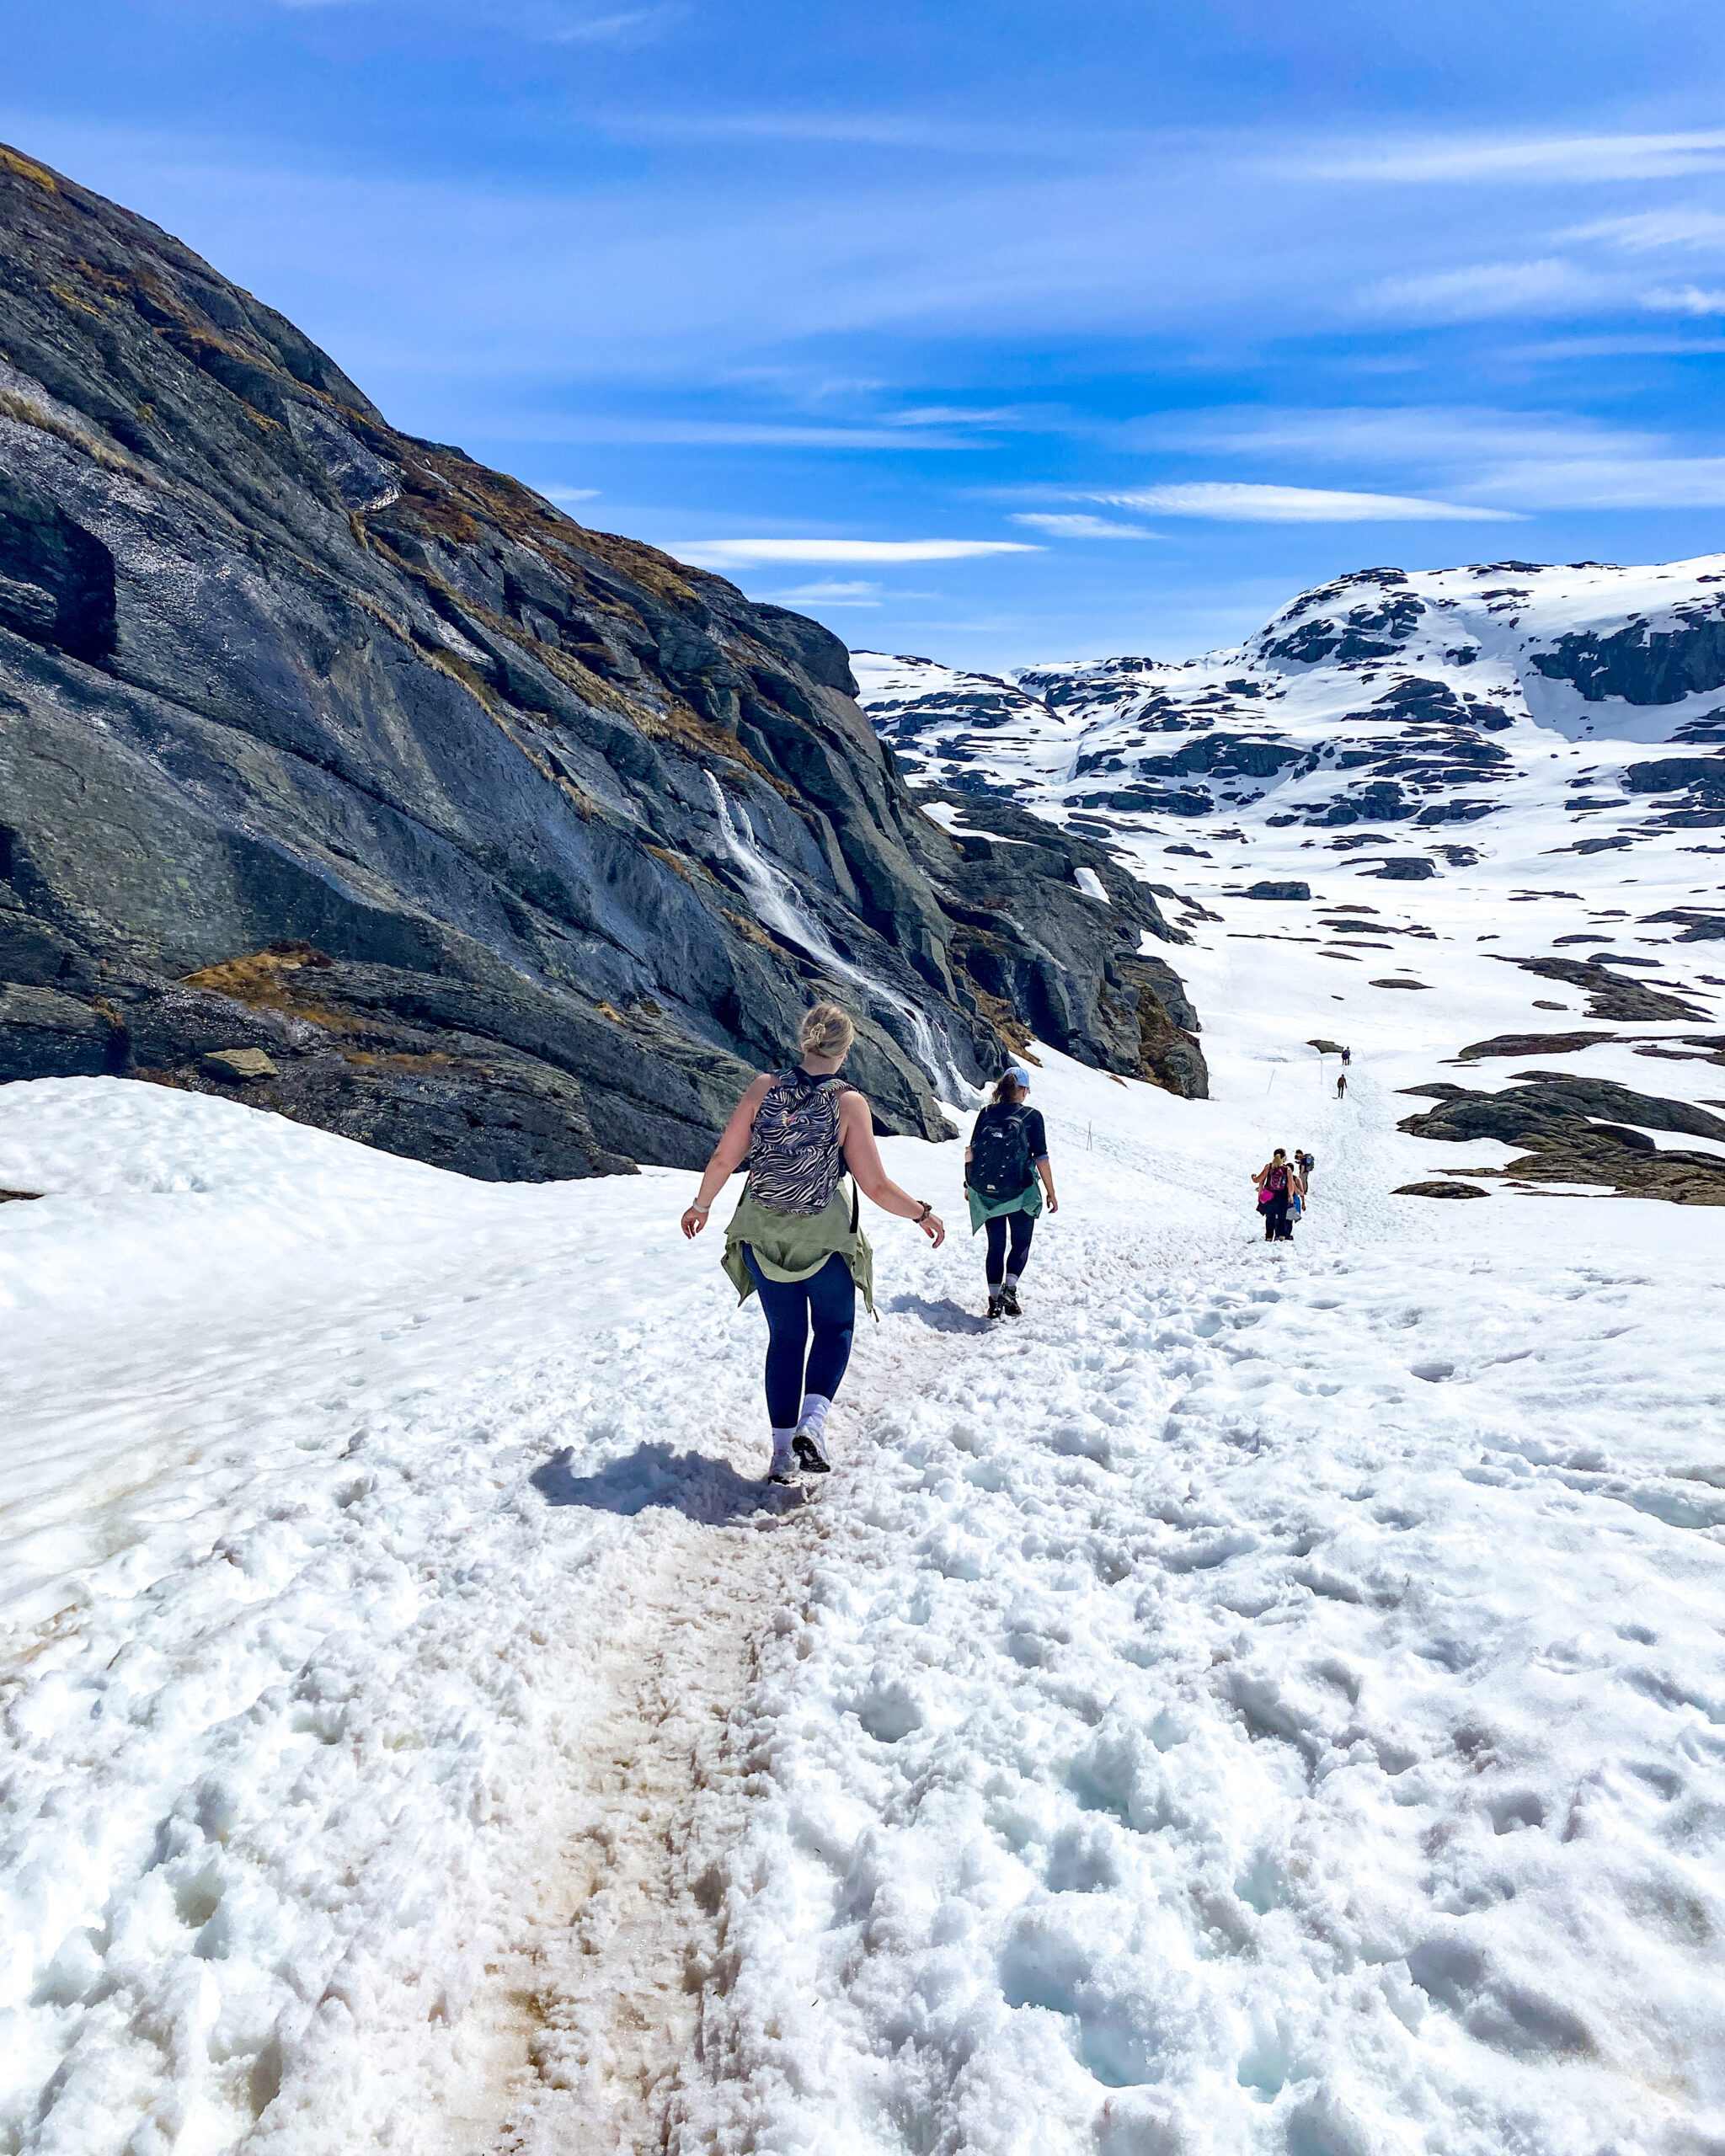 Hiking in Norway in the snow